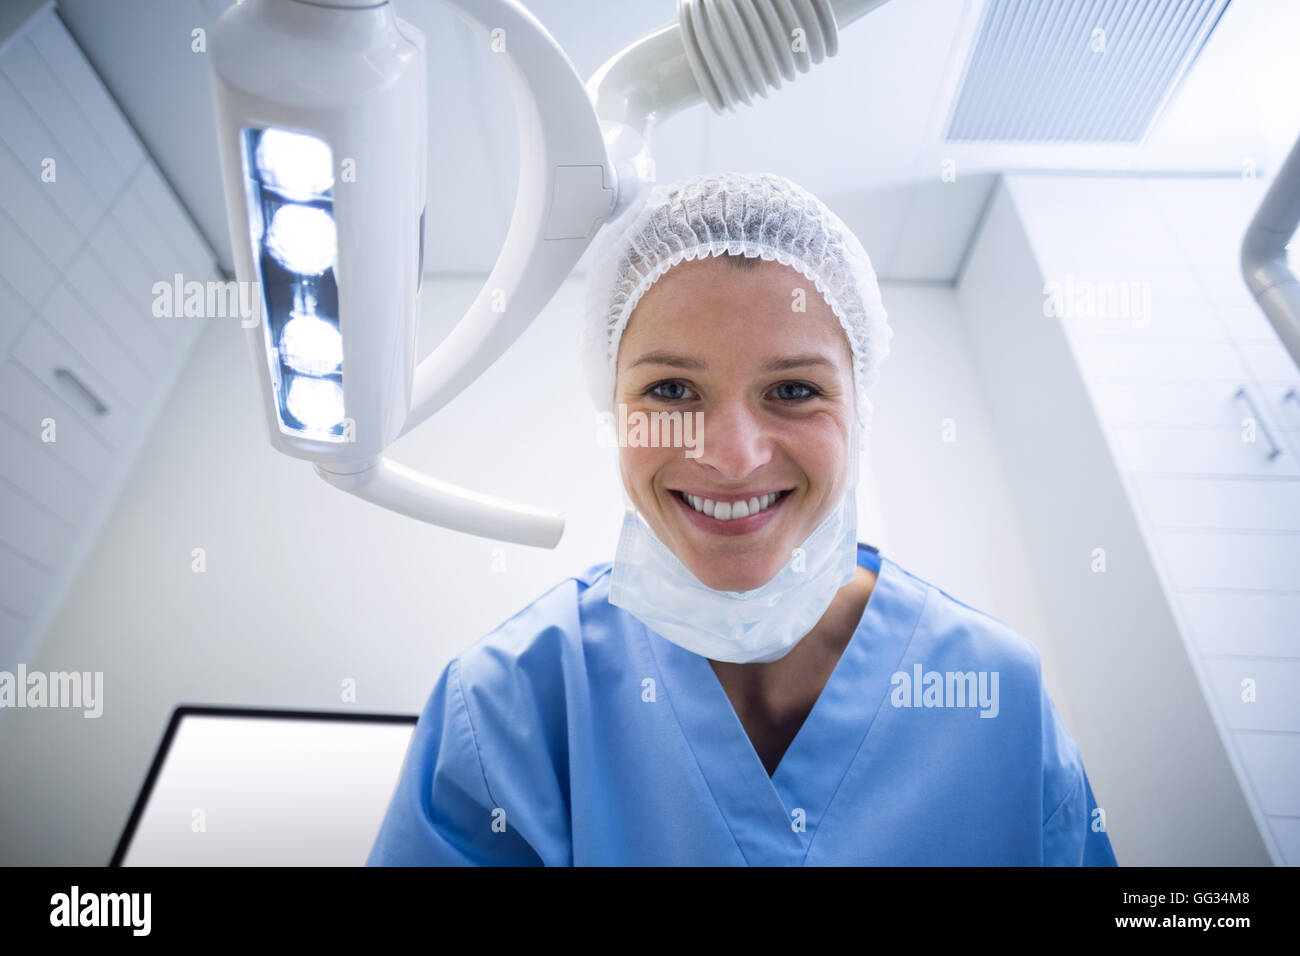 Dental assistant smiling at camera beside light Stock Photo